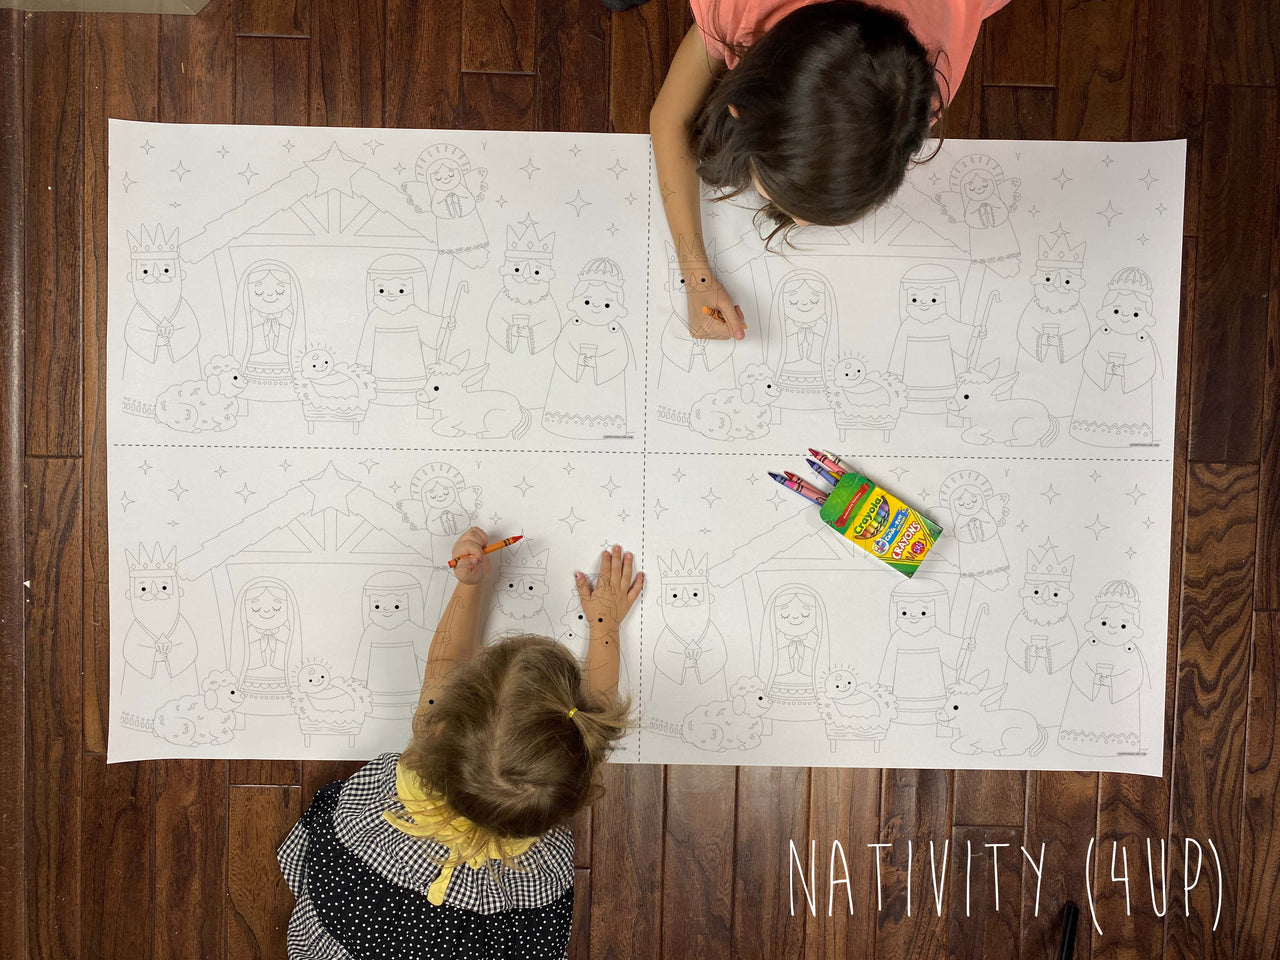 Nativity (4UP) Table Size Coloring Sheet